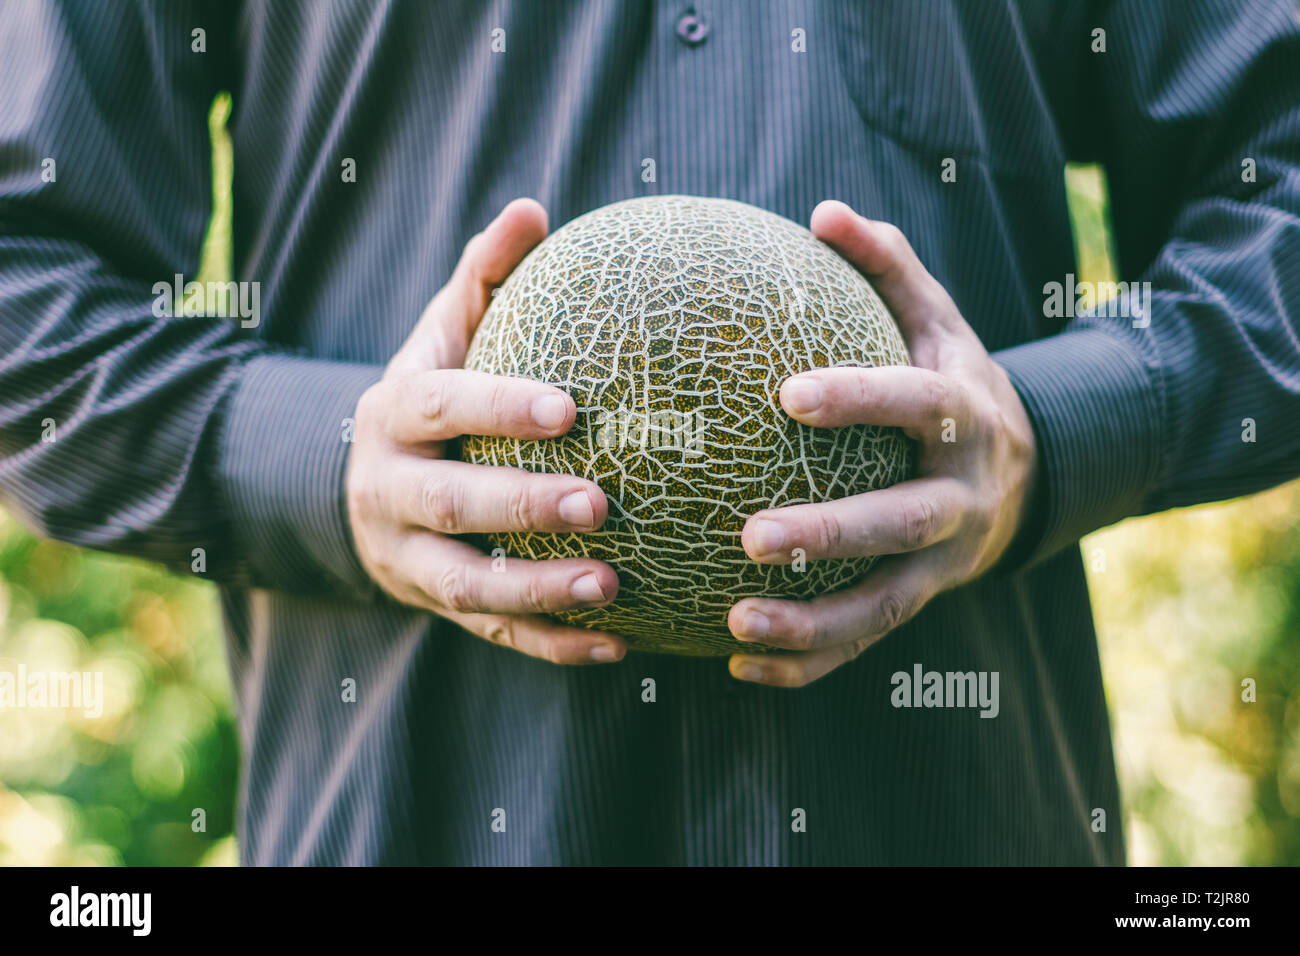 the man is holding a ripe melon Stock Photo